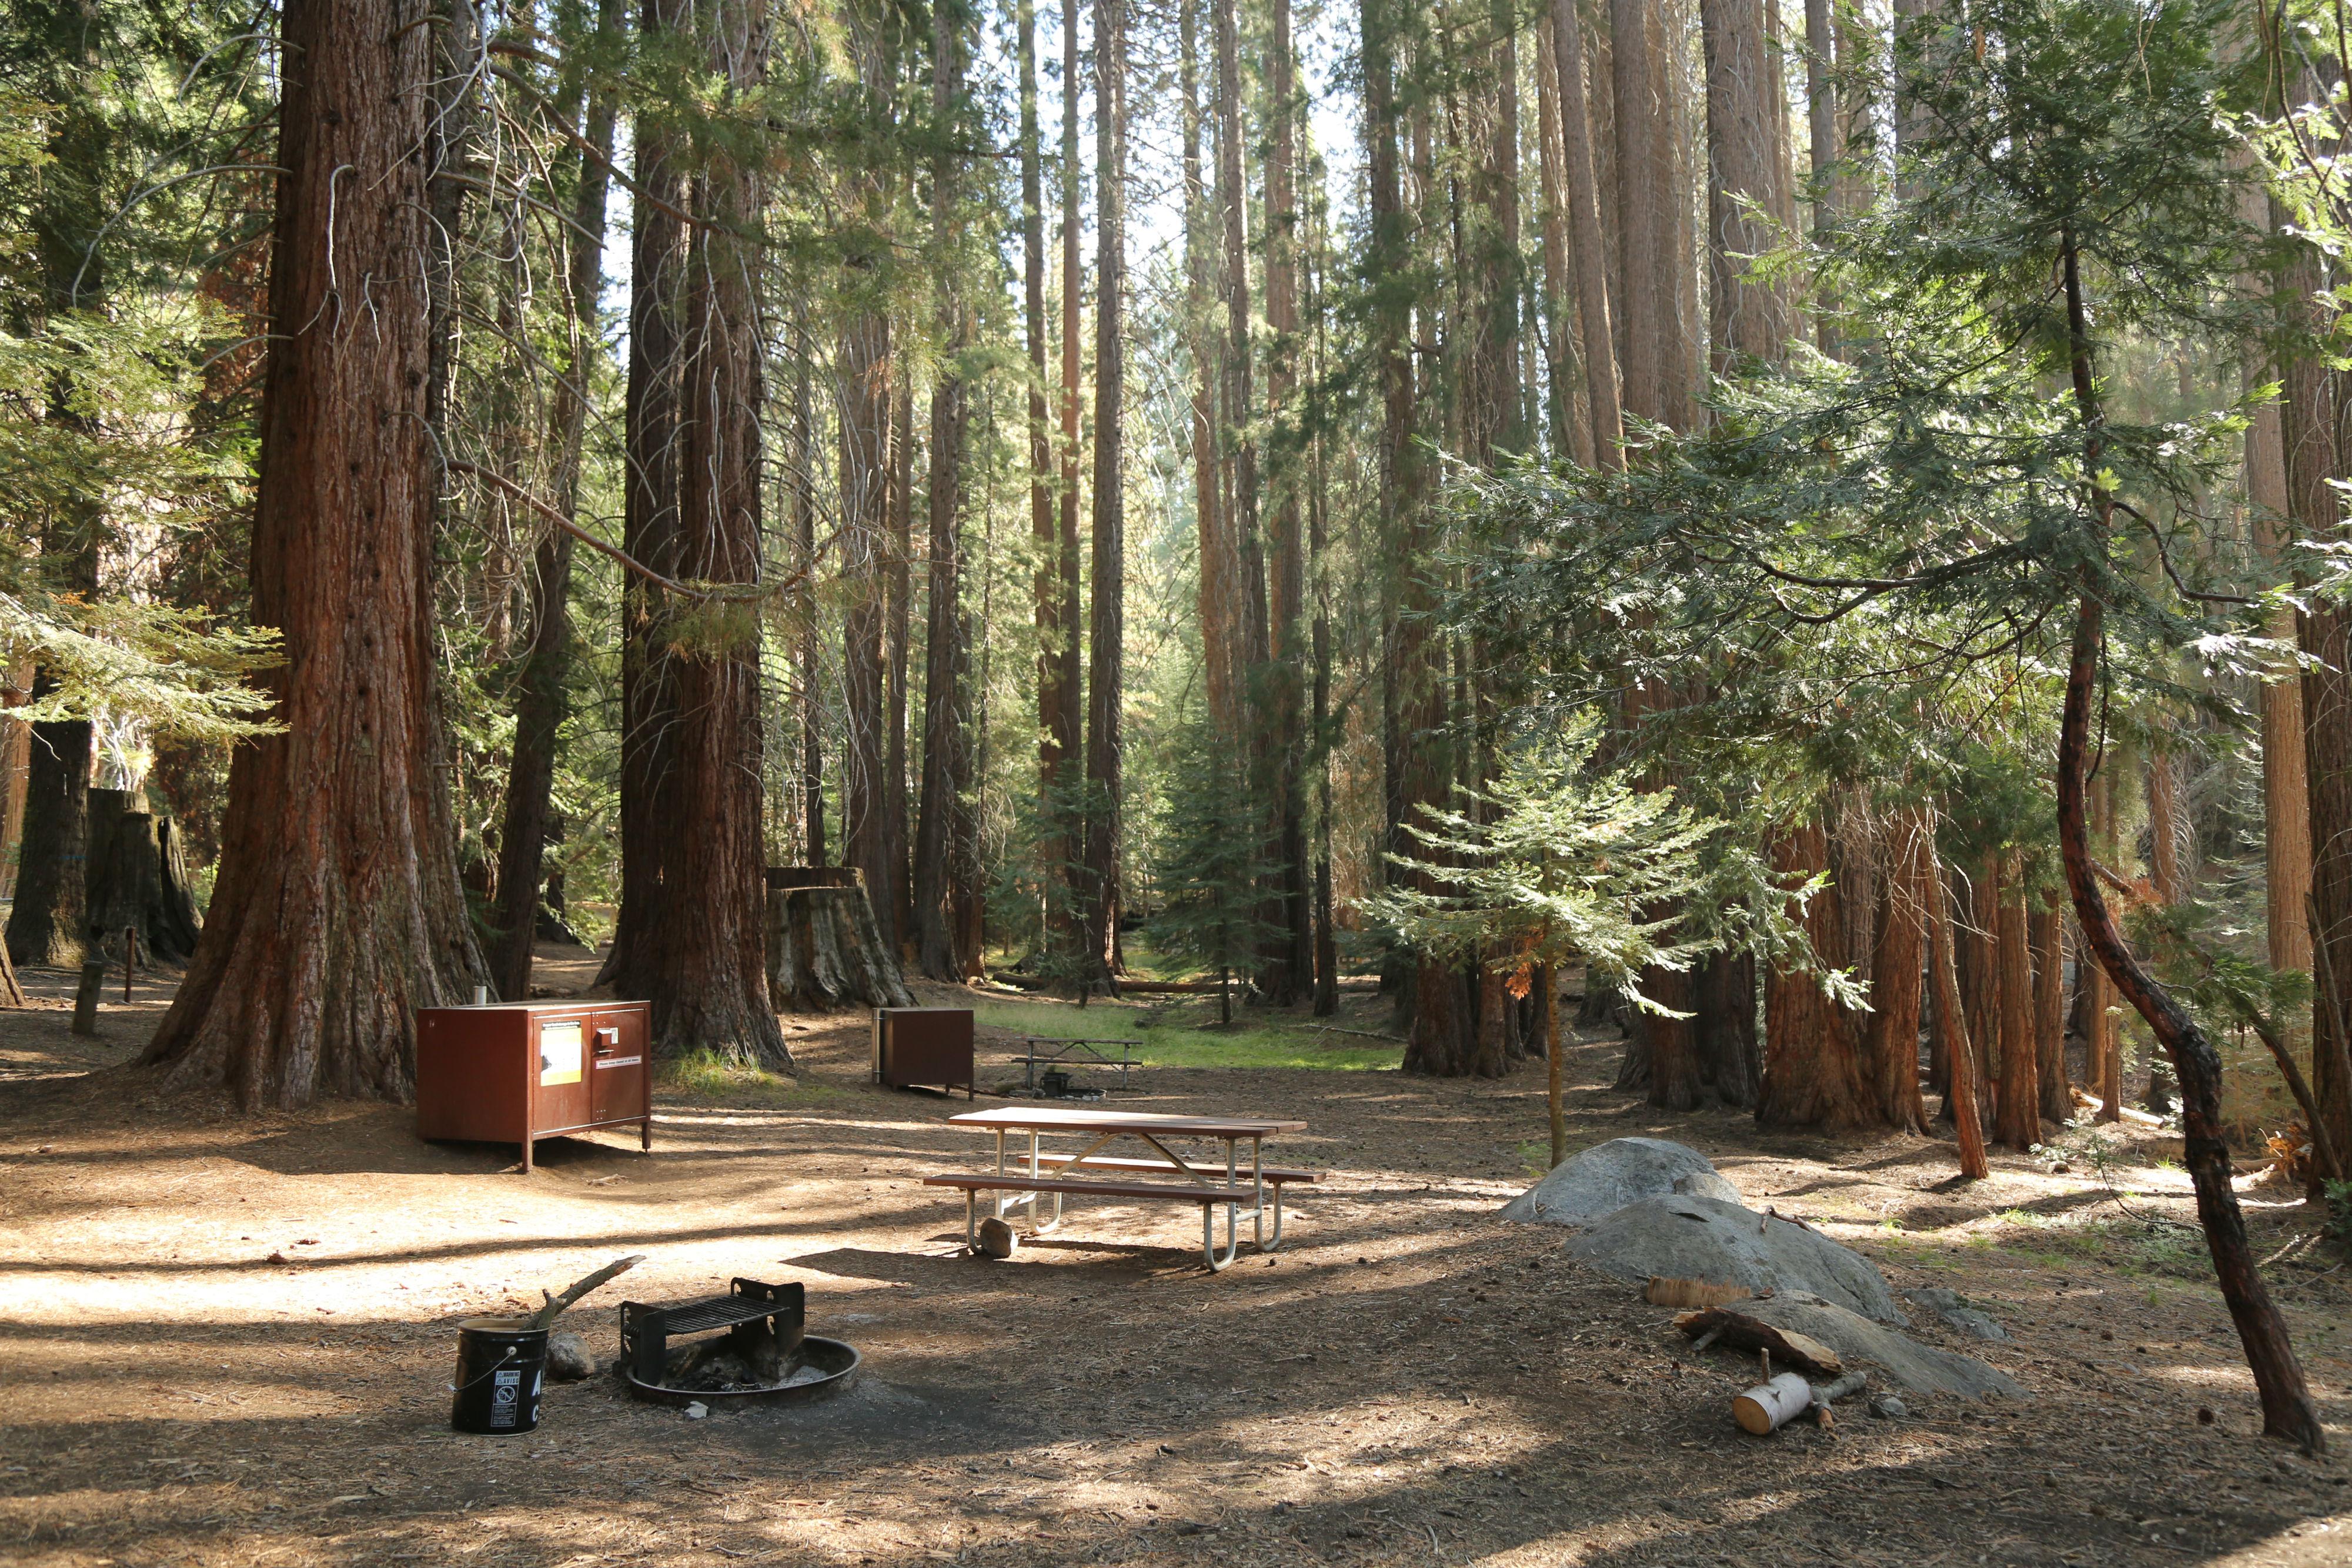 Picnic tables on level ground in a shady forest